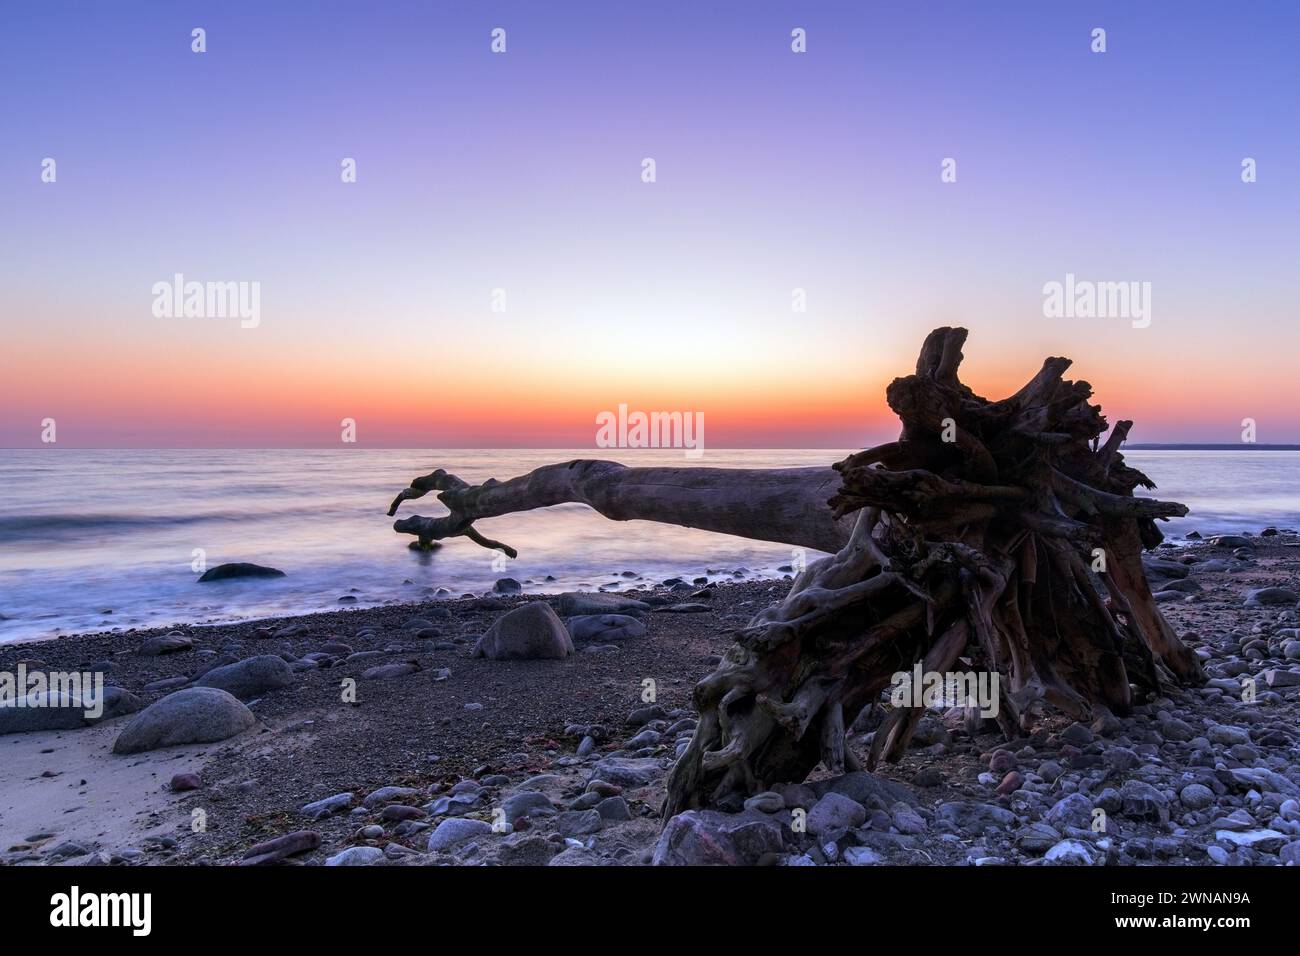 Dead tree on beach at Brodtener Ufer / Brodten Steilufer, cliff in the Bay of Lübeck along the Baltic Sea at sunrise, Schleswig-Holstein, Germany Stock Photo